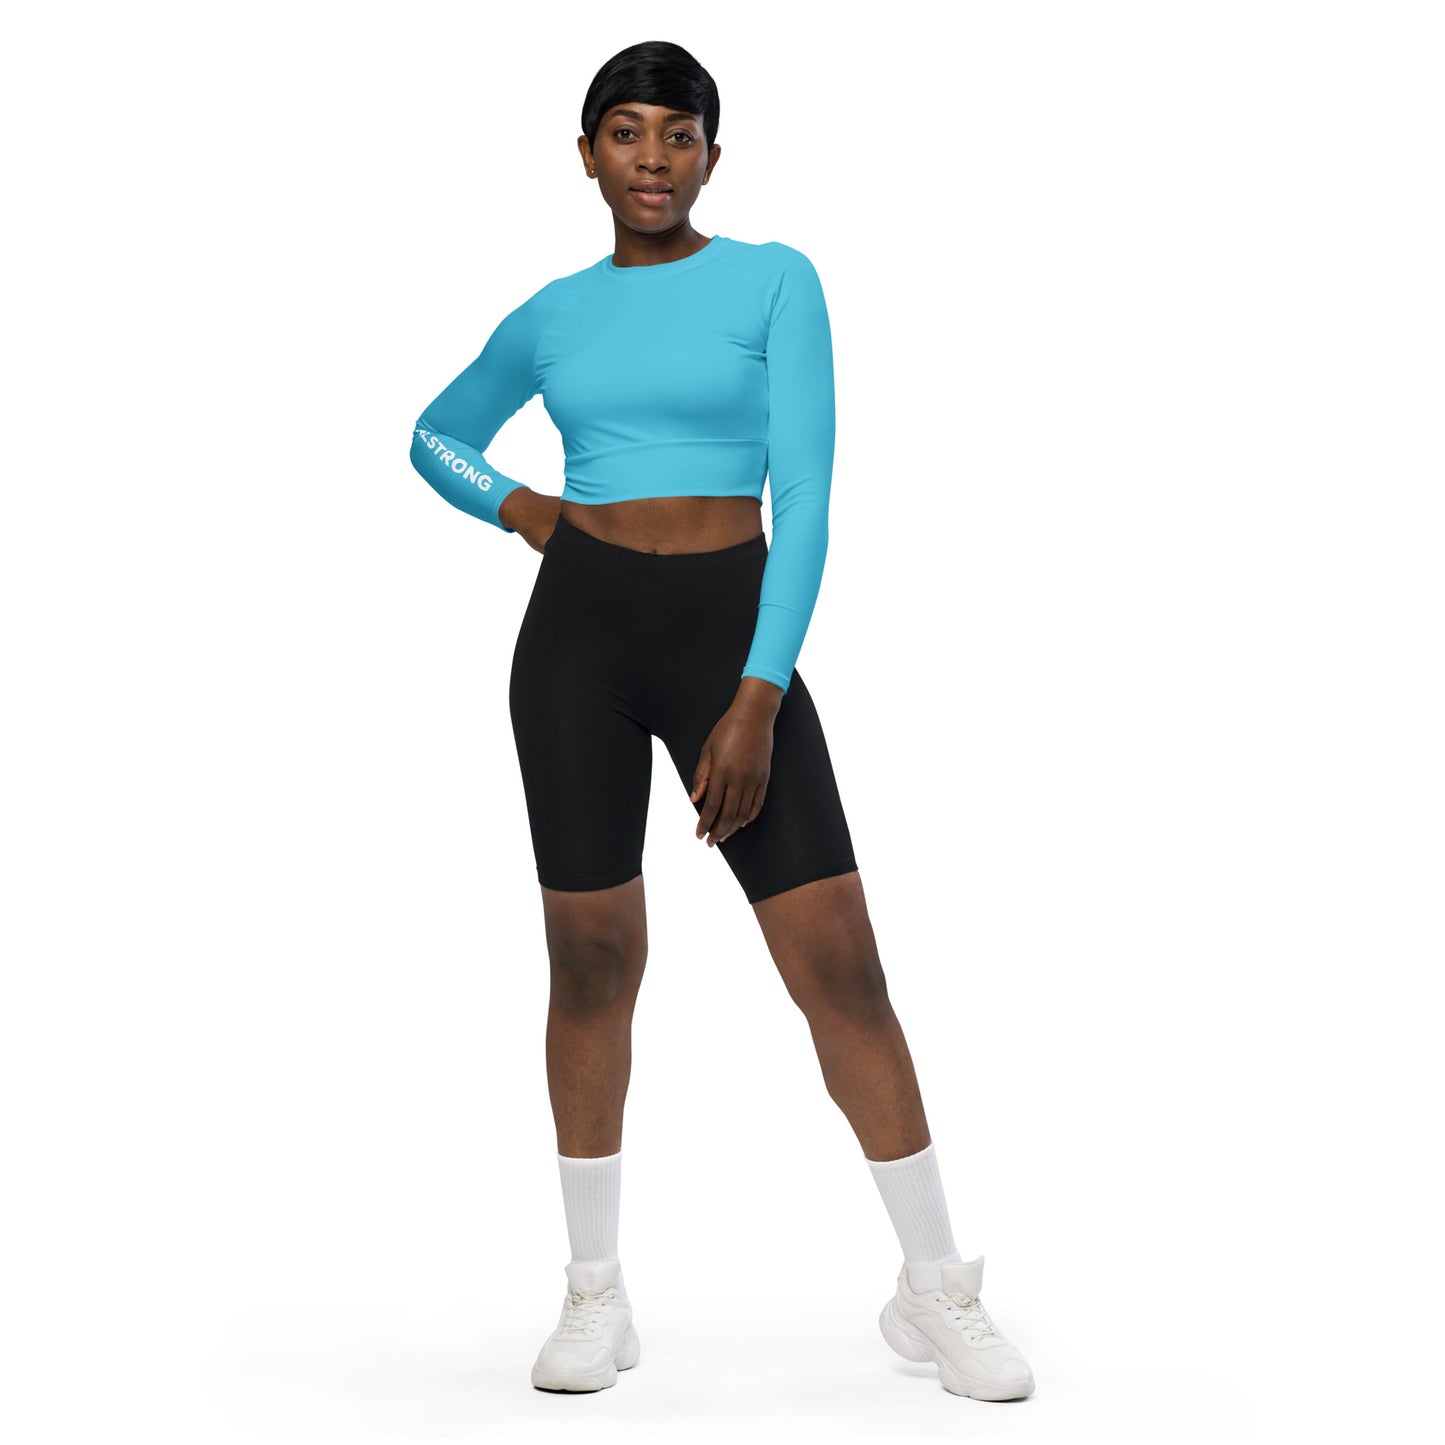 THE ESSENTIAL LONG SLEEVE FITTED CROP TOP BRIGHT BLUE